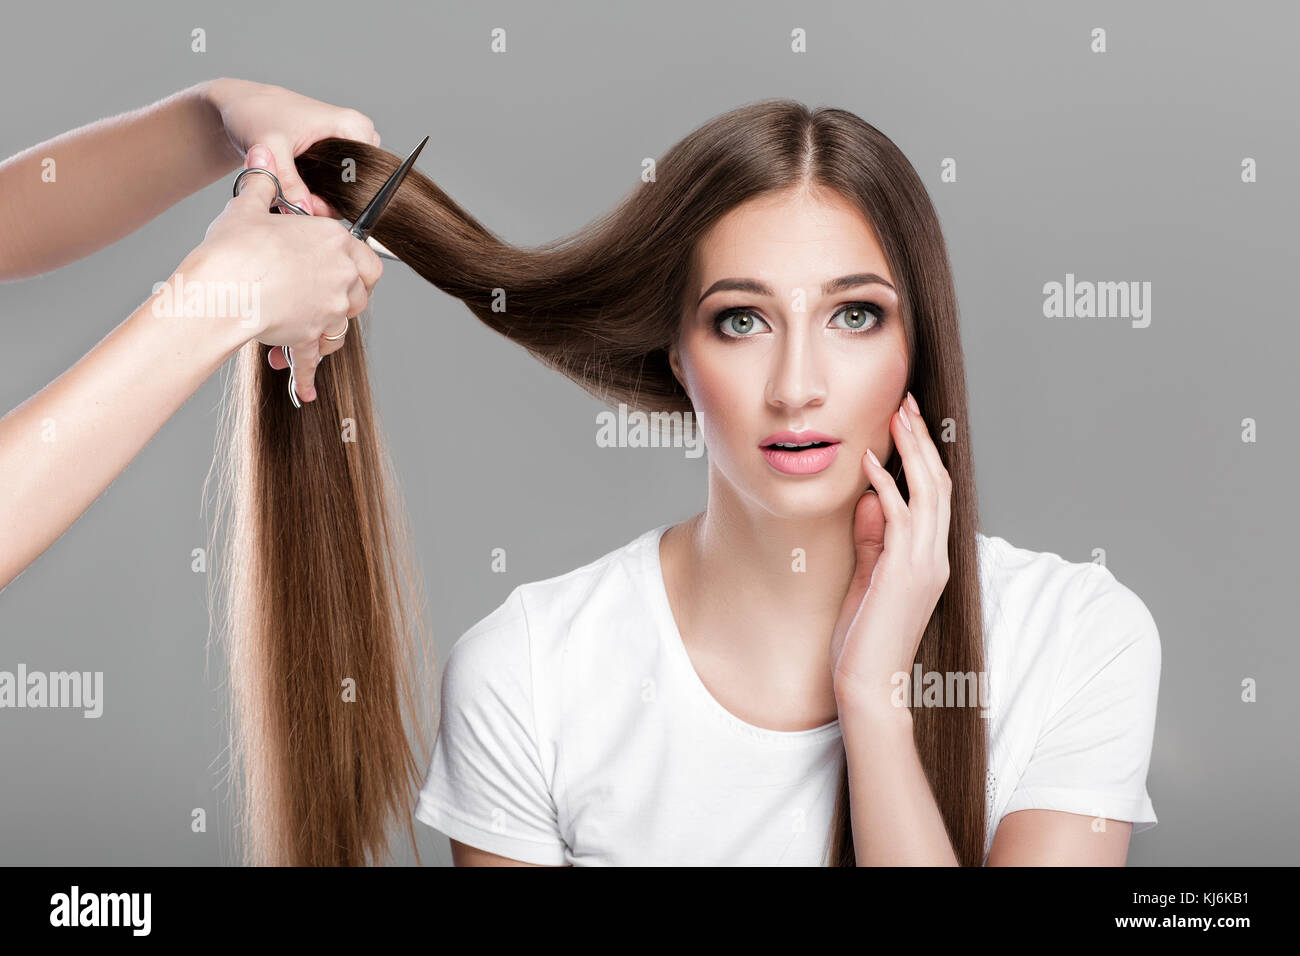 woman with  long hair holds scissors  Stock Photo